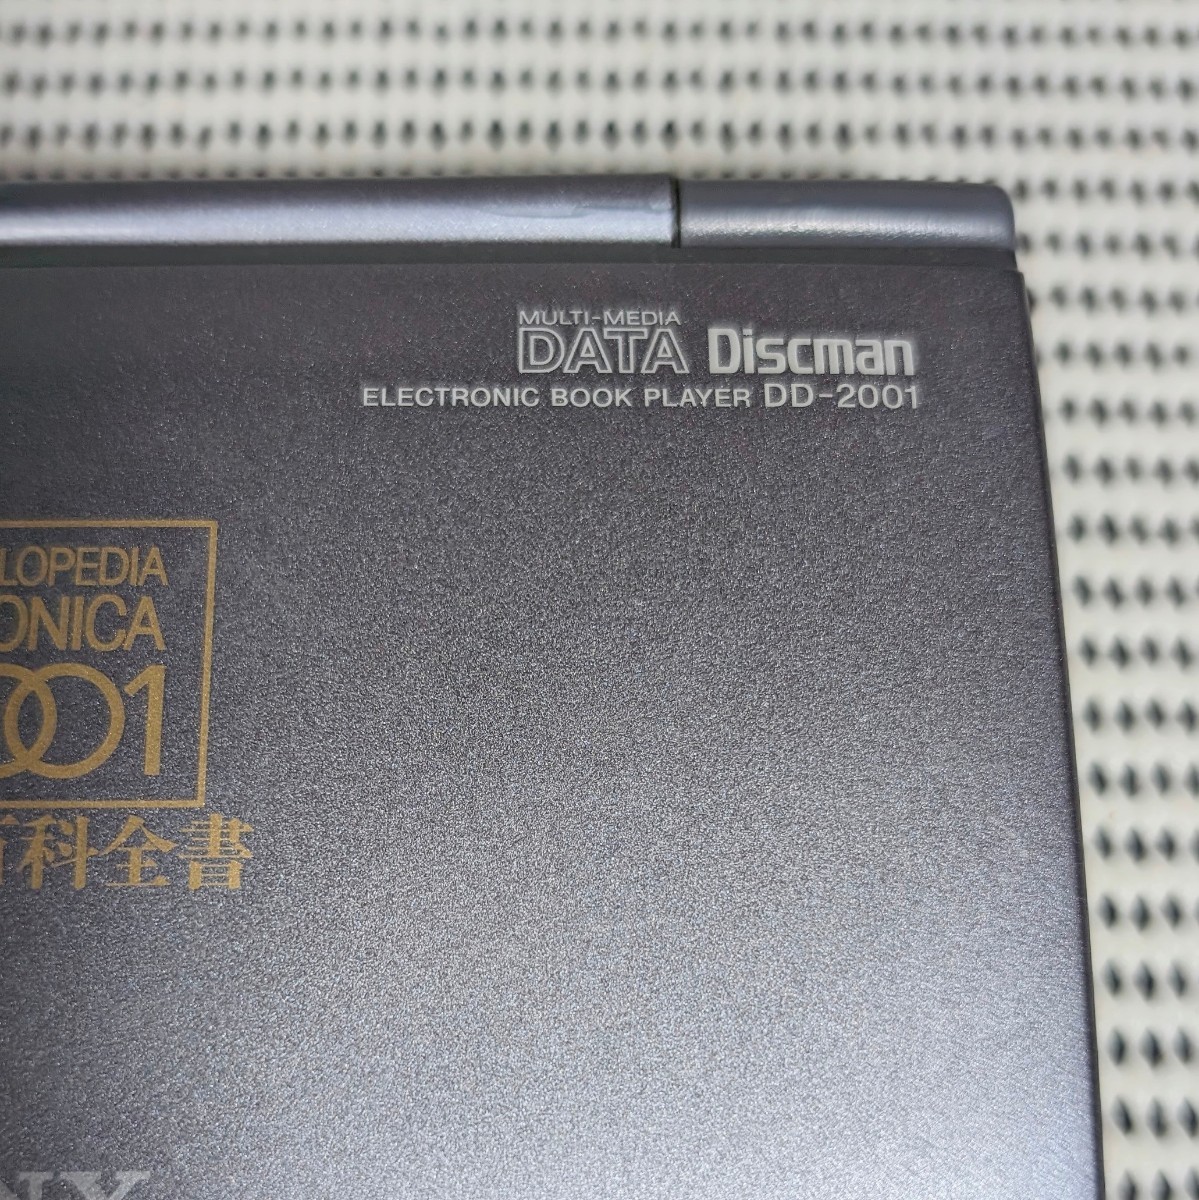  that time thing SONY DD-2001 DATA Discman Sony computerized dictionary electron book 2001 Japan large various subjects all paper operation not yet verification present condition goods 